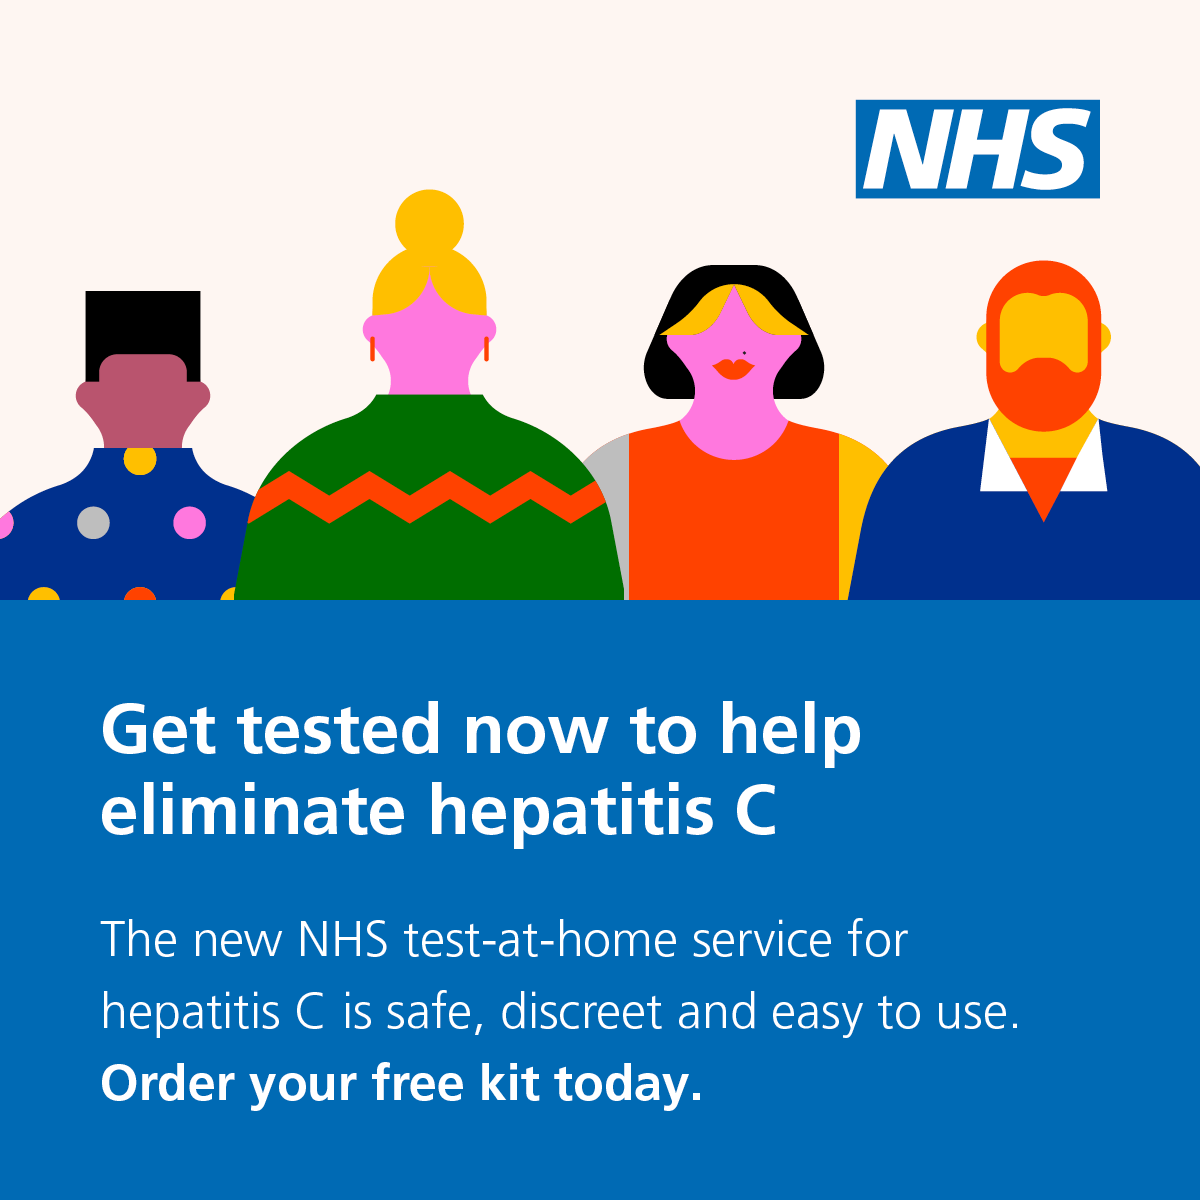 Anyone worried they may be at risk of hepatitis C can order a confidential test online through our website. ➡️ hepctest.nhs.uk